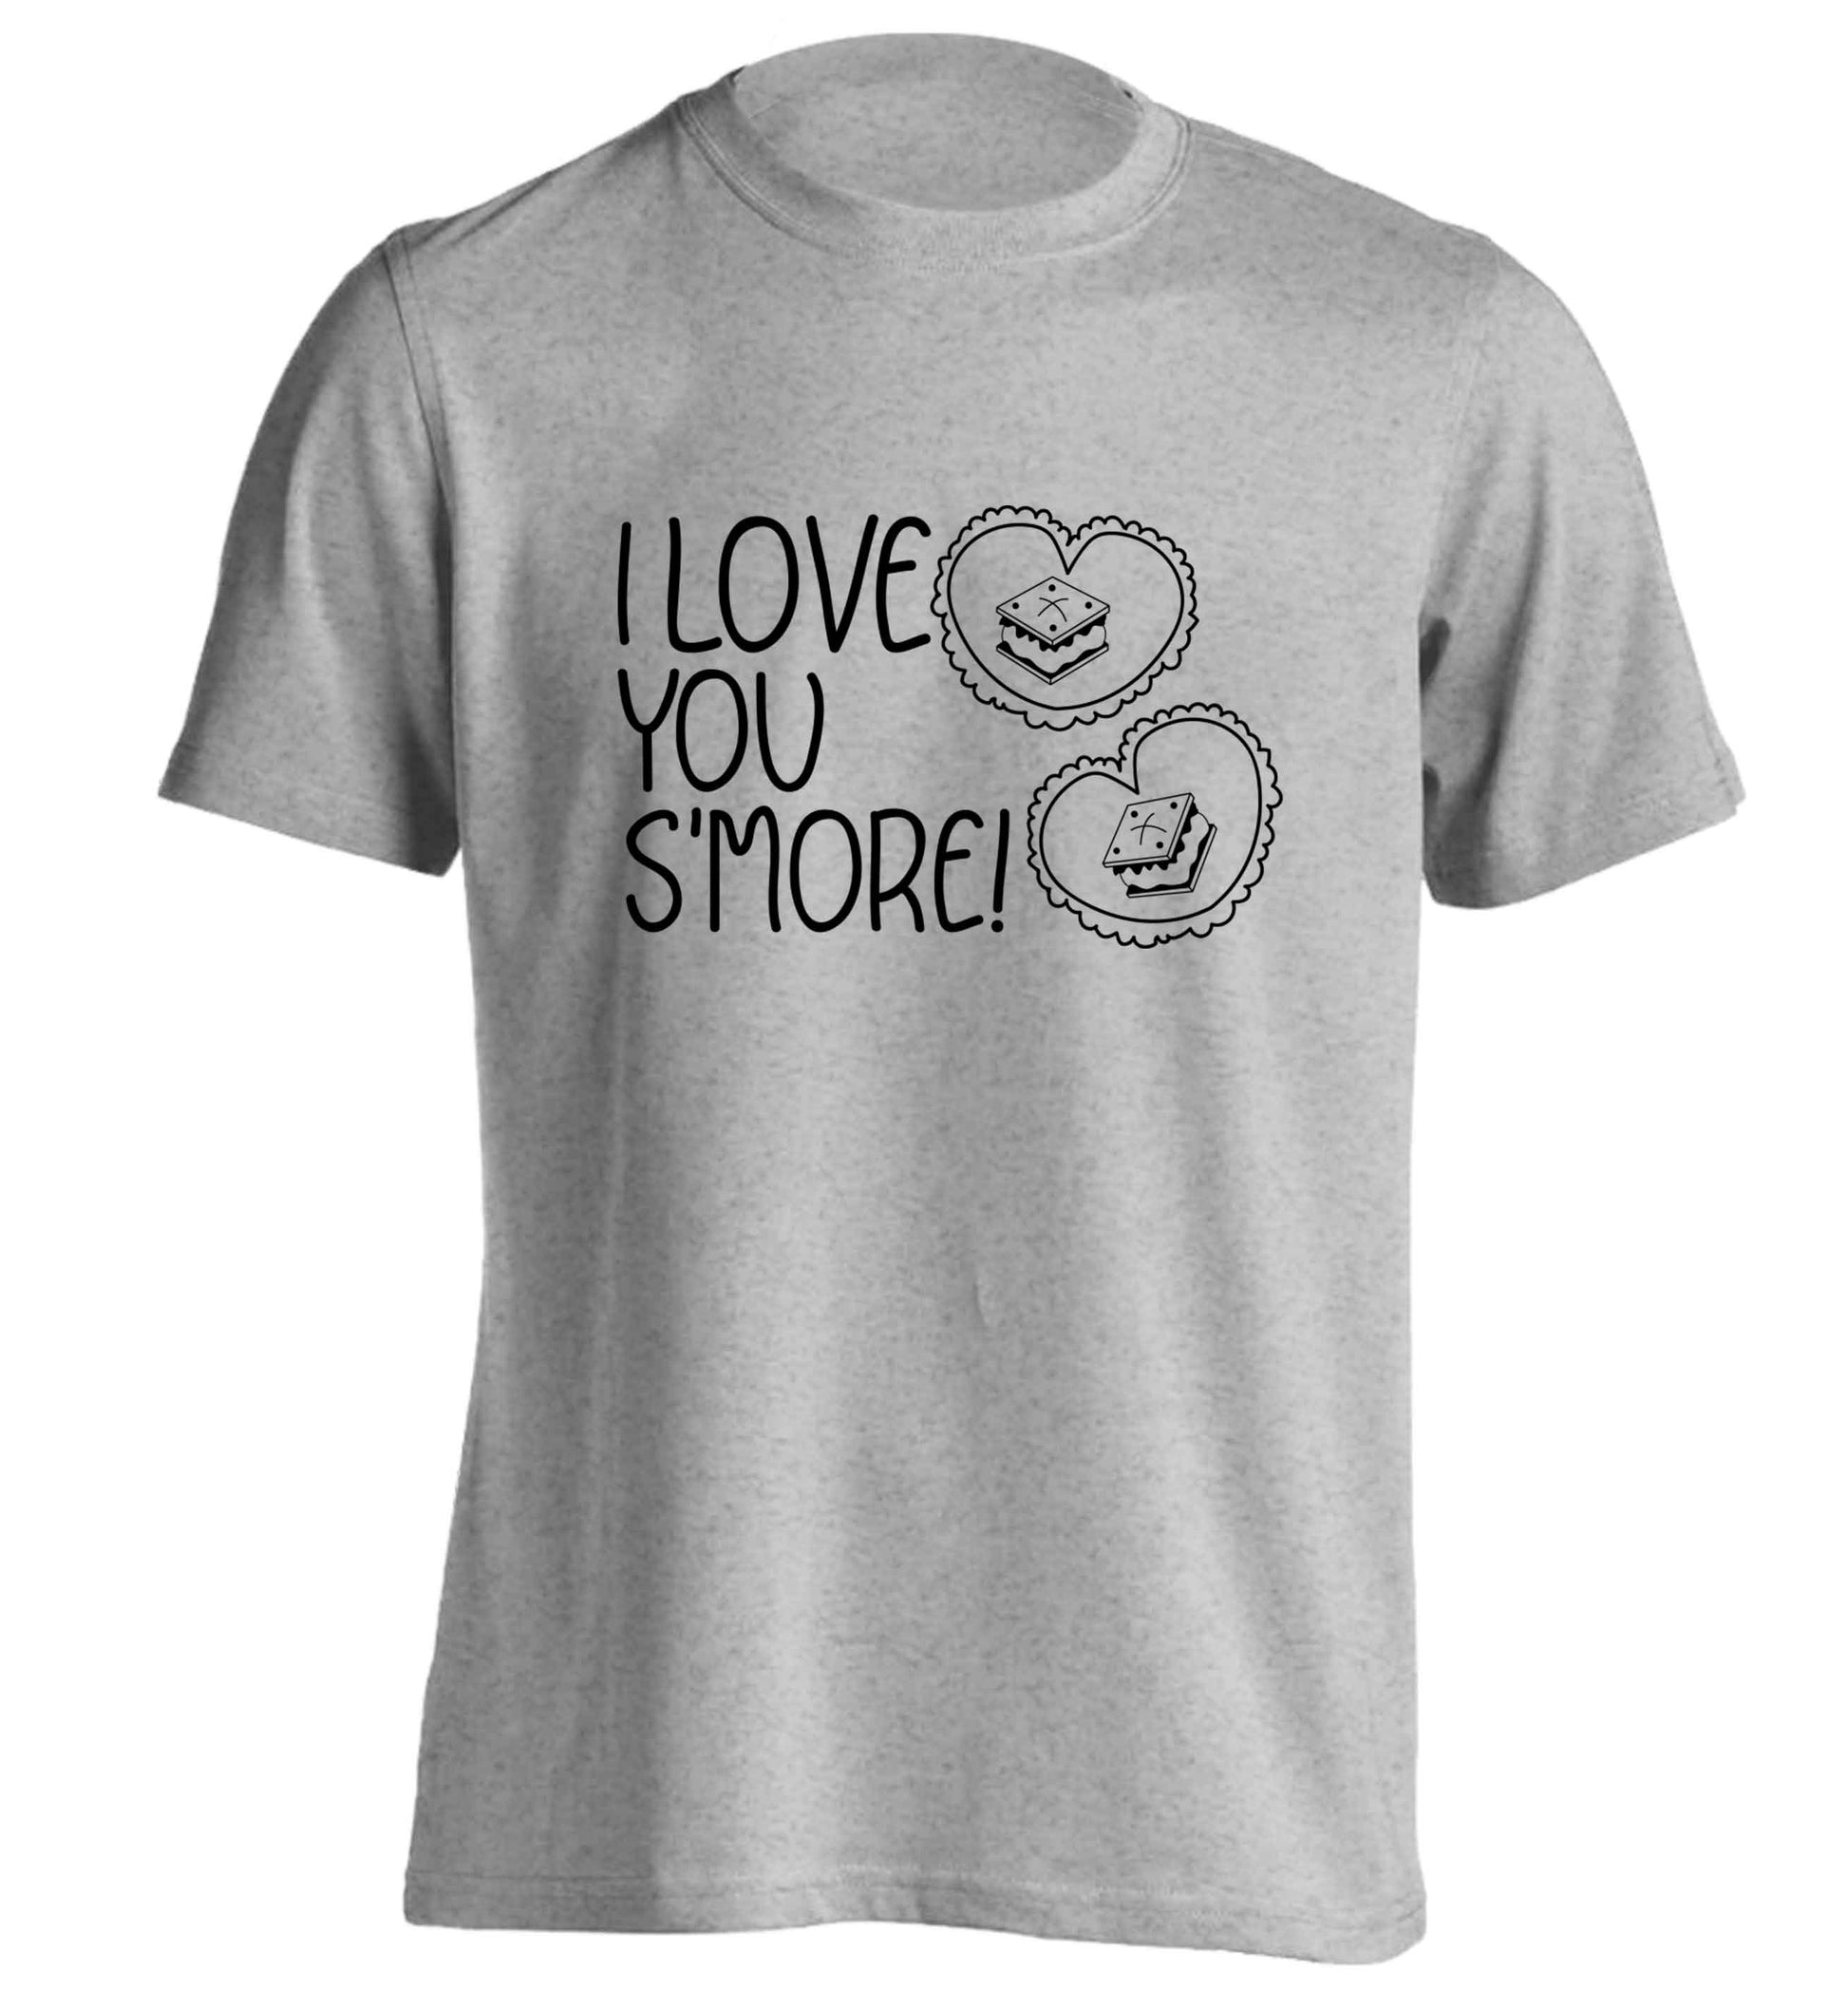 I love you s'more than anything adults unisex grey Tshirt 2XL